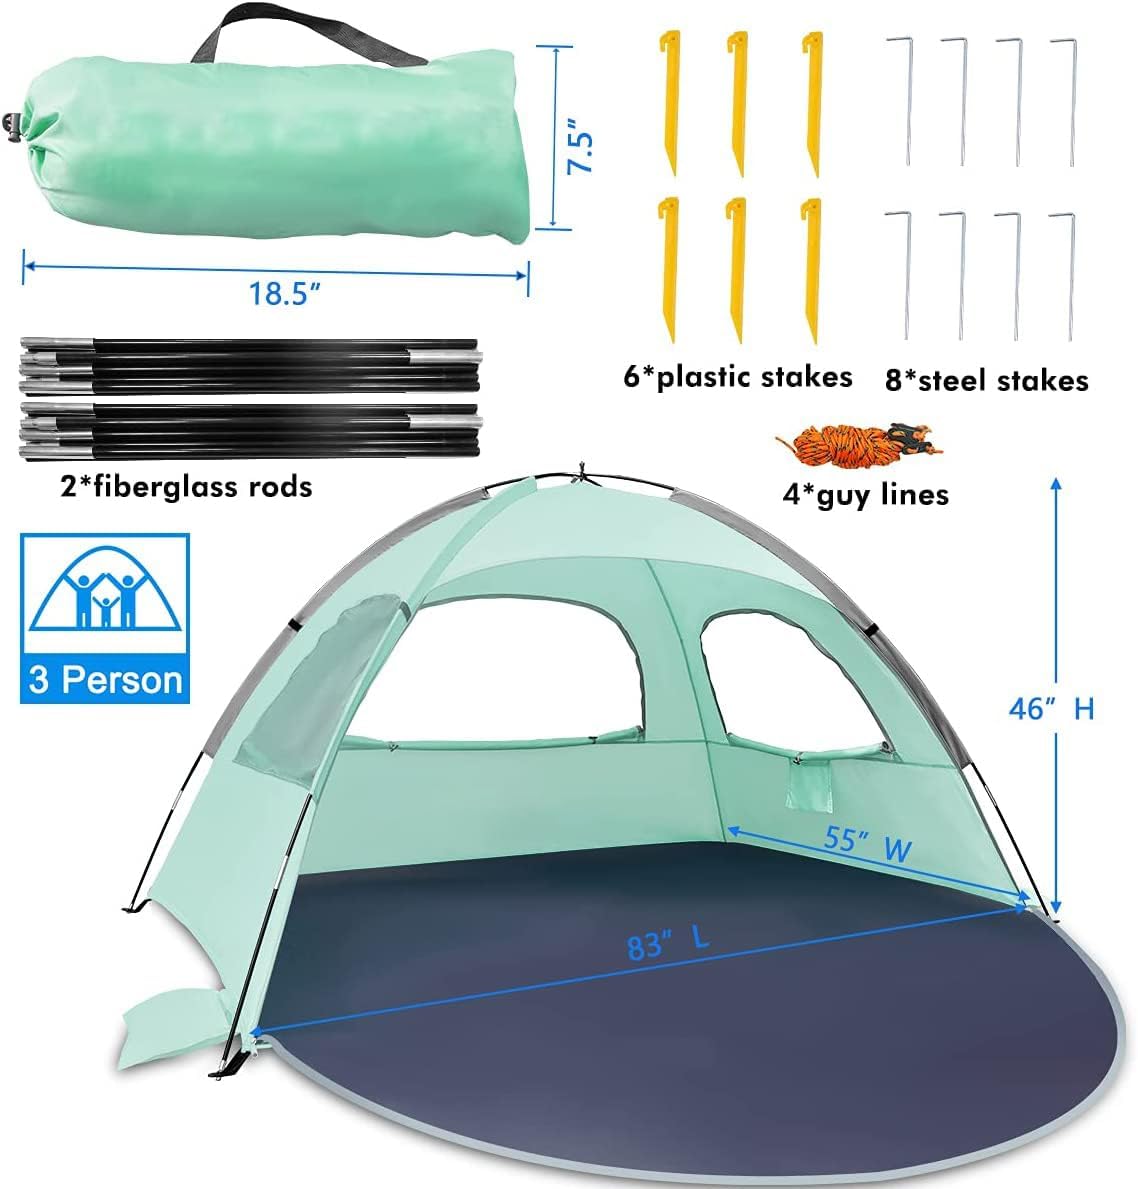 WhiteFang Beach Tent Review